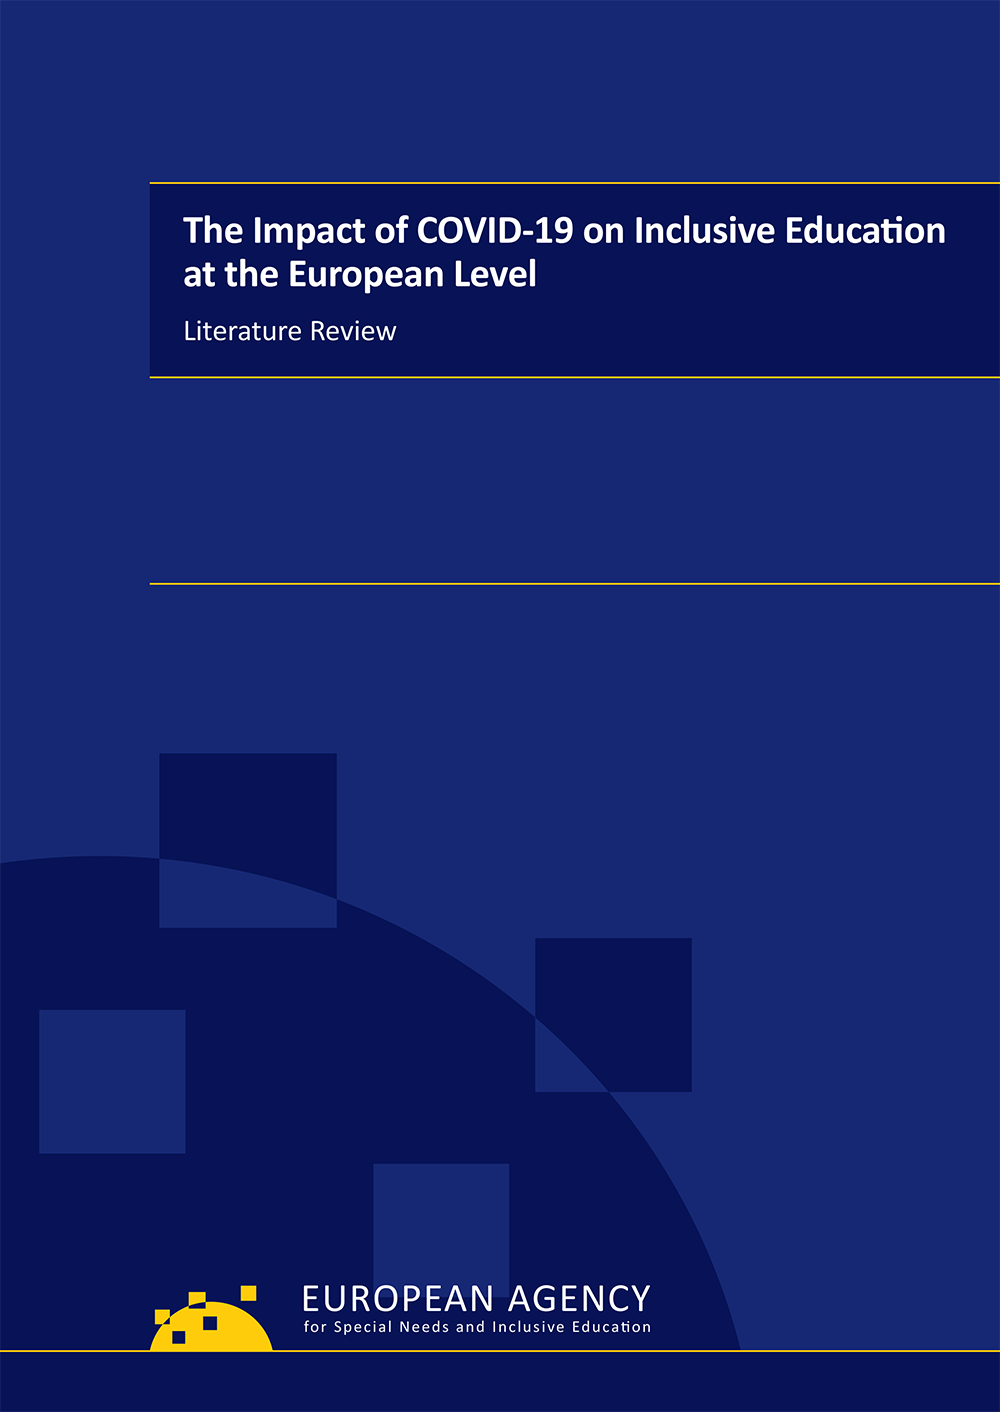 The Impact of COVID-19 on Inclusive Education at the European Level: Literature Review